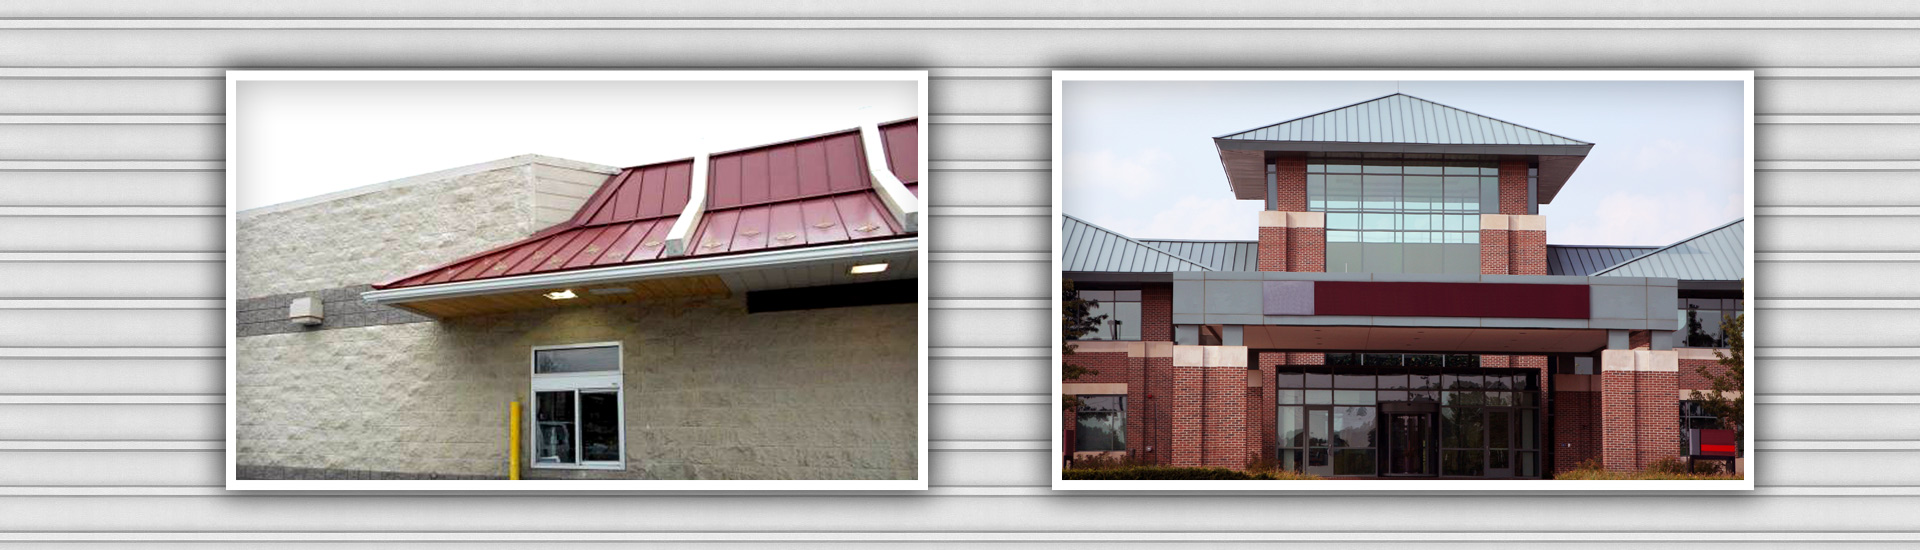 Metal Roofing on Commercial Properties